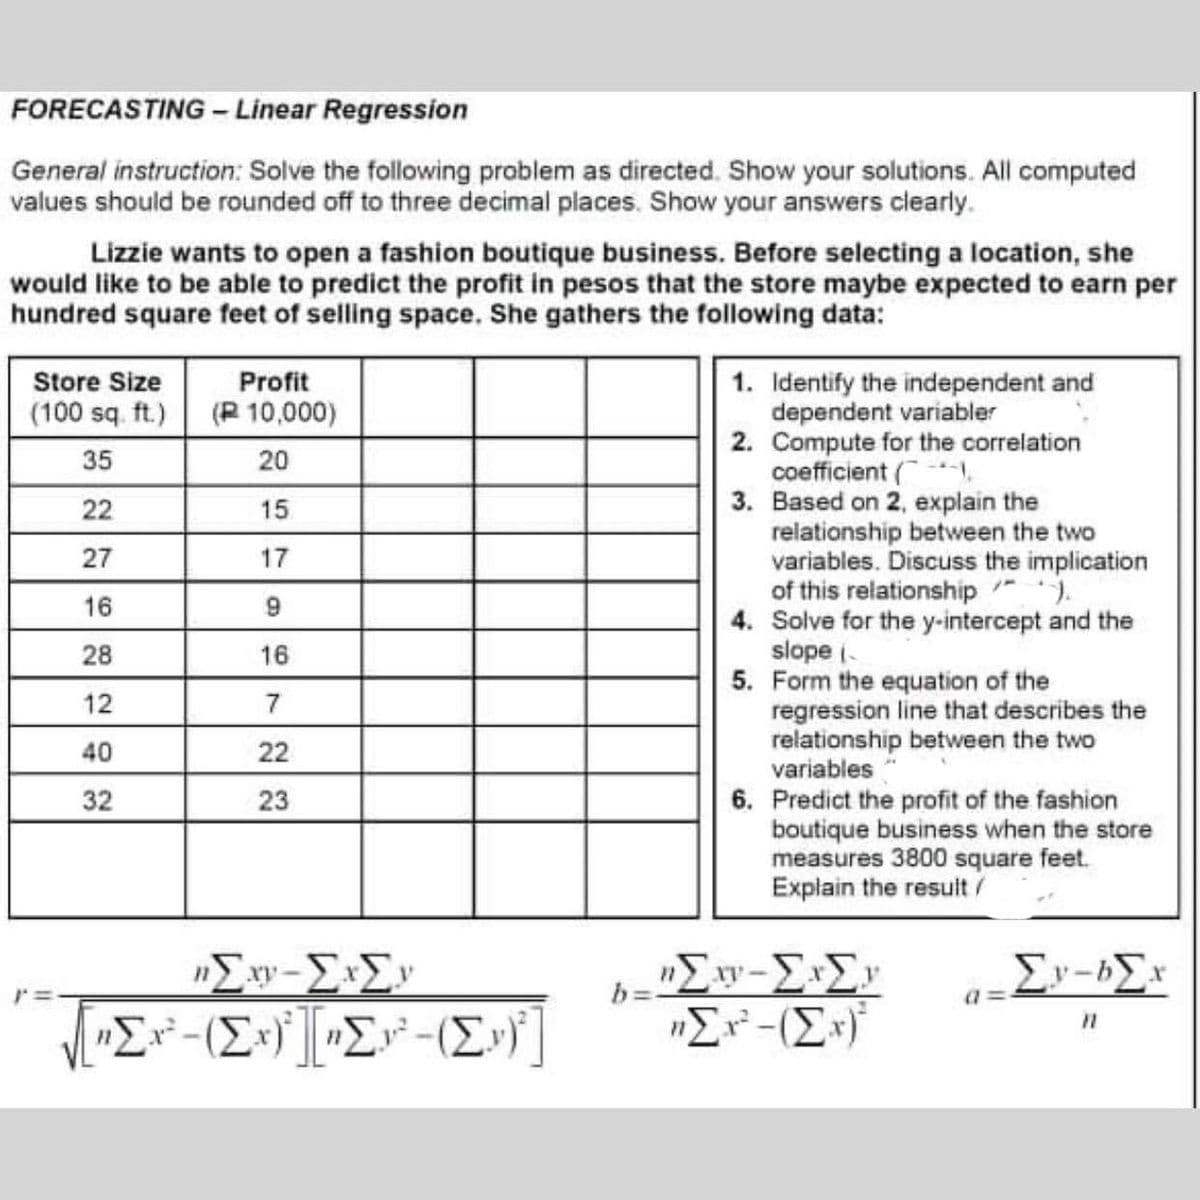 FORECASTING - Linear Regression
General instruction: Solve the following problem as directed. Show your solutions. All computed
values should be rounded off to three decimal places. Show your answers clearly.
Lizzie wants to open a fashion boutique business. Before selecting a location, she
would like to be able to predict the profit in pesos that the store maybe expected to earn per
hundred square feet of selling space. She gathers the following data:
Store Size
Profit
1. Identify the independent and
dependent variabler
2. Compute for the correlation
coefficient (.
3. Based on 2, explain the
relationship between the two
variables. Discuss the implication
of this relationship ").
4. Solve for the y-intercept and the
slope i-
5. Form the equation of the
regression line that describes the
relationship between the two
variables
(100 sq. ft.) (R 10,000)
35
20
22
15
27
17
16
28
16
12
7
40
22
6. Predict the profit of the fashion
boutique business when the store
measures 3800 square feet.
Explain the result/
32
23
"Er-(E*)
